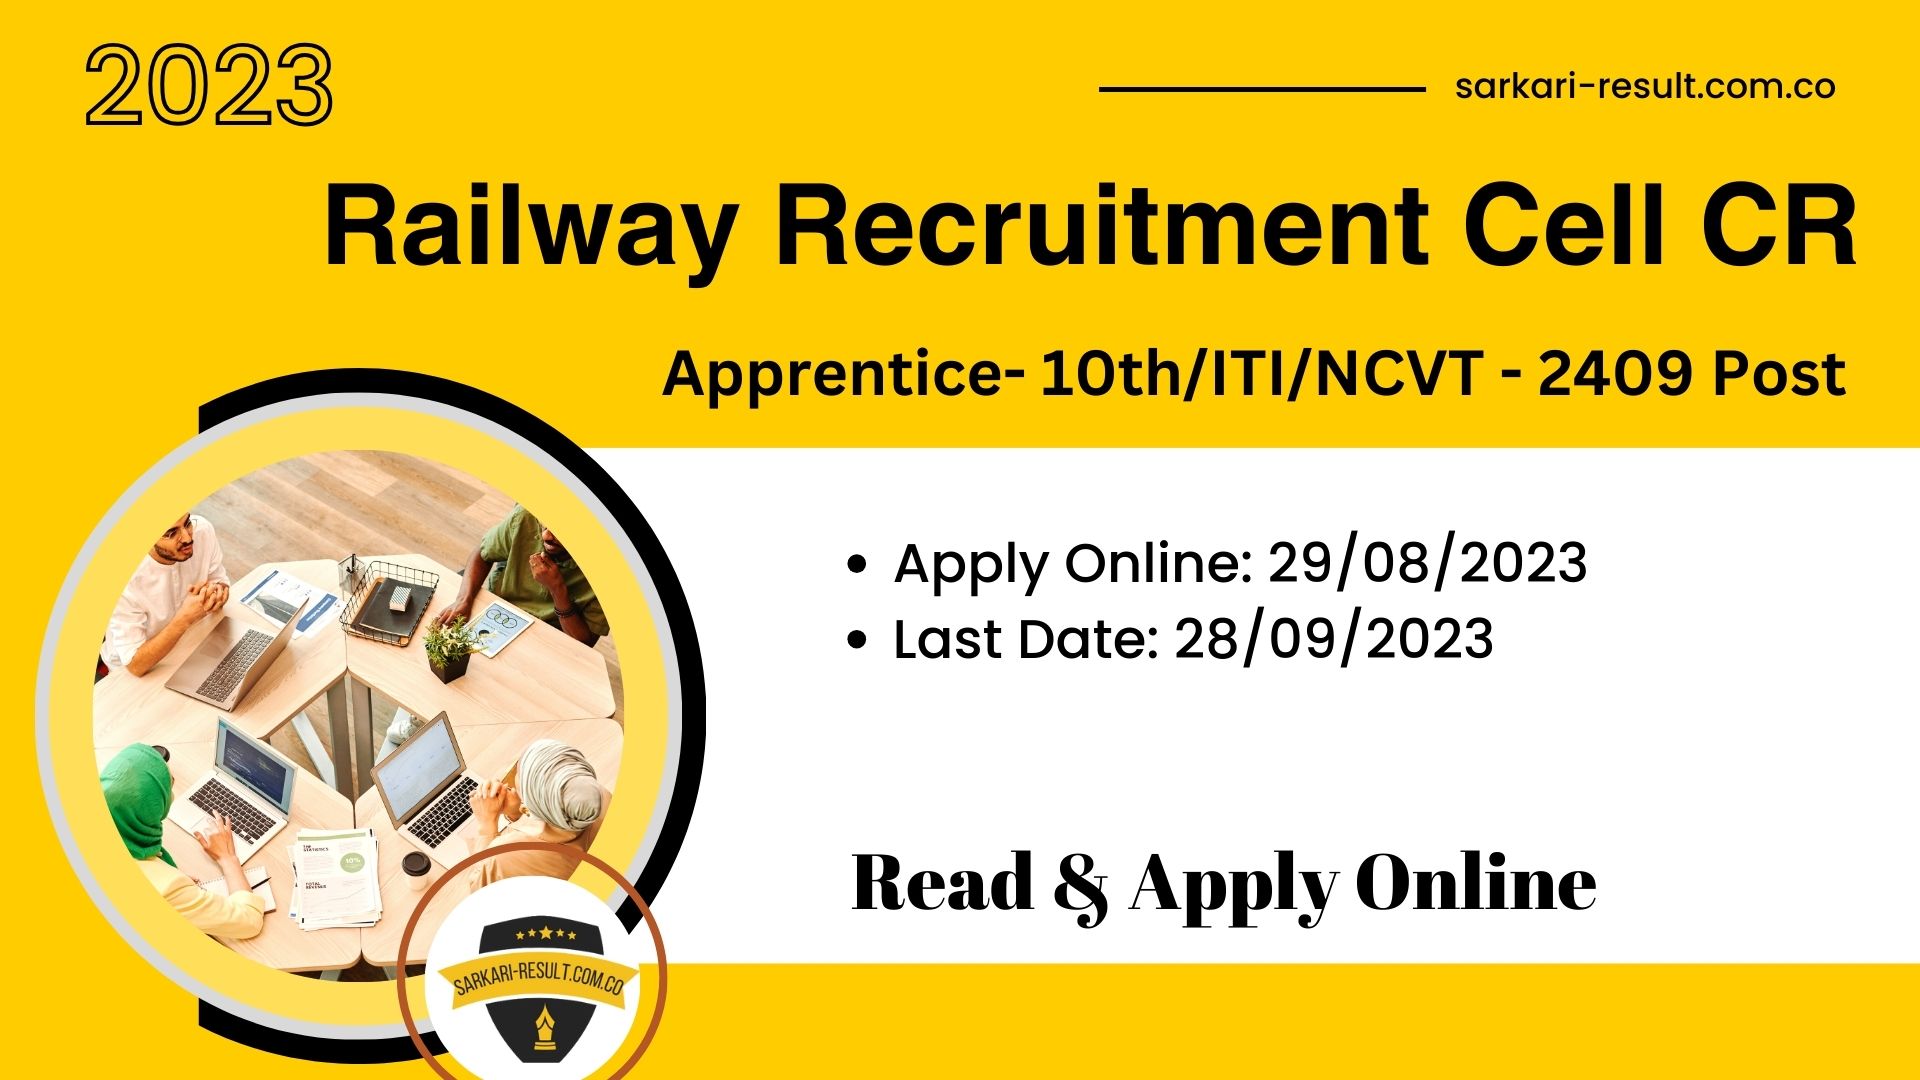 Central Railway RRC CR Mumbai Apprentices 2023 Apply Online for 2409 Post